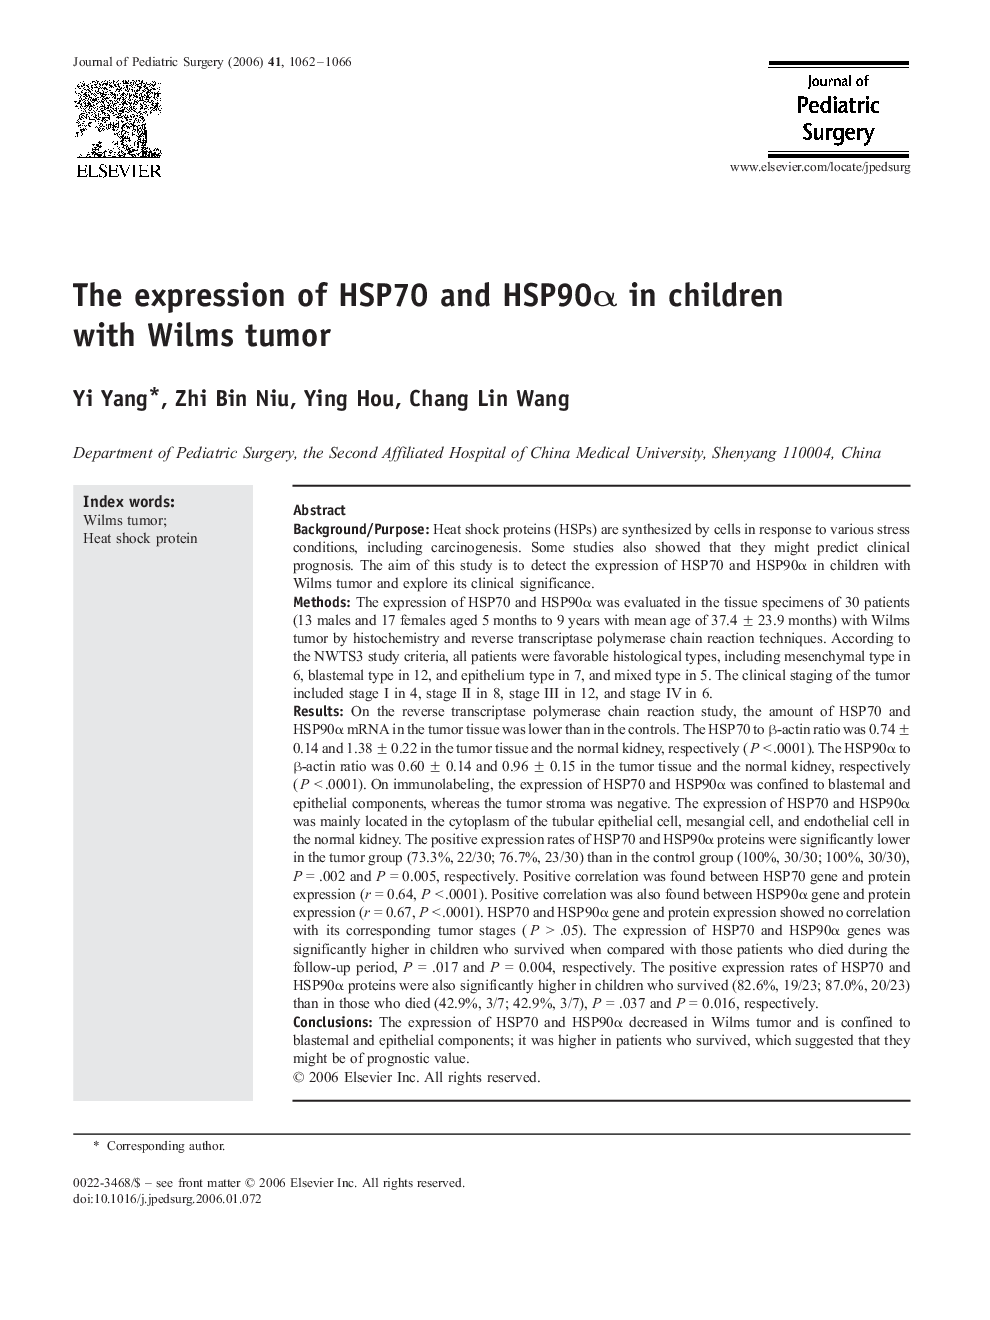 The expression of HSP70 and HSP90Î± in children with Wilms tumor